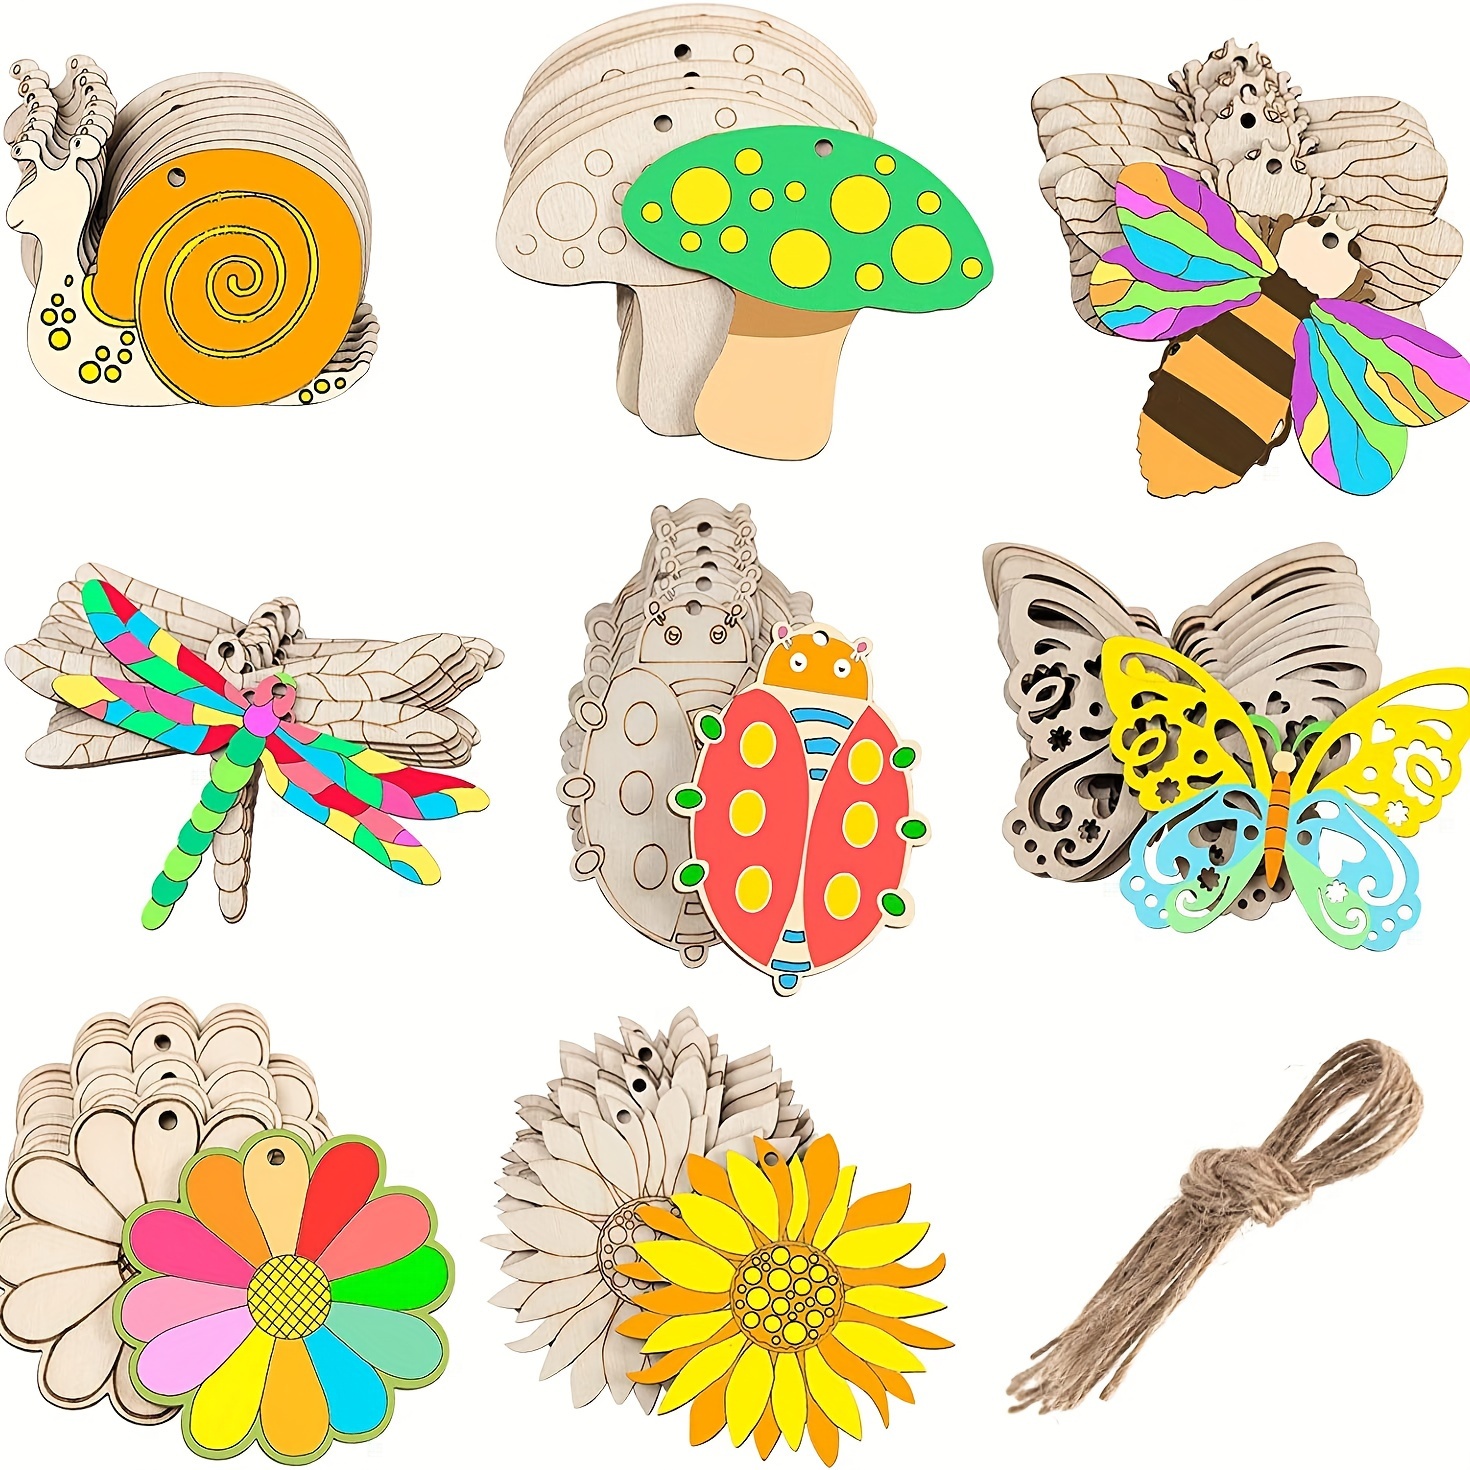 

8/32pcs Wooden Cutouts Butterfly Wood Slices, Summer Sunflower Animals Wood Cutouts Blank Wooden Paint Crafts For Painting, Diy Doodle Crafts Home Decoration Art Activity Birthday Party Favors